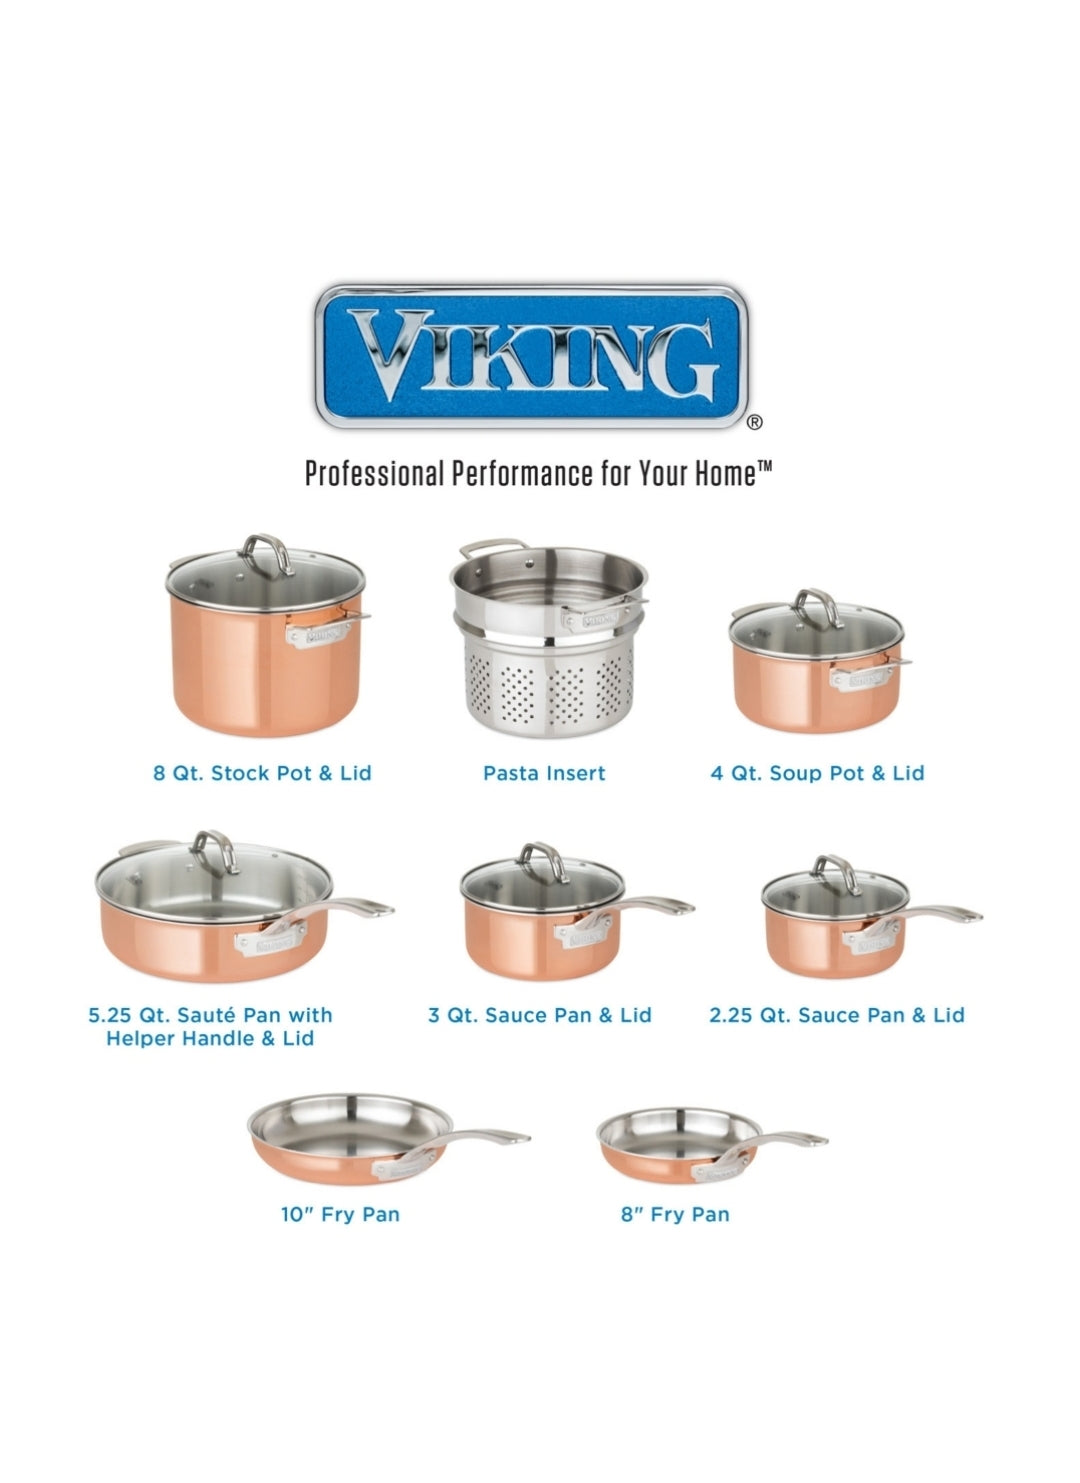 Viking 13-Piece Tri-Ply Stainless Steel Cookware Set with Glass Lids